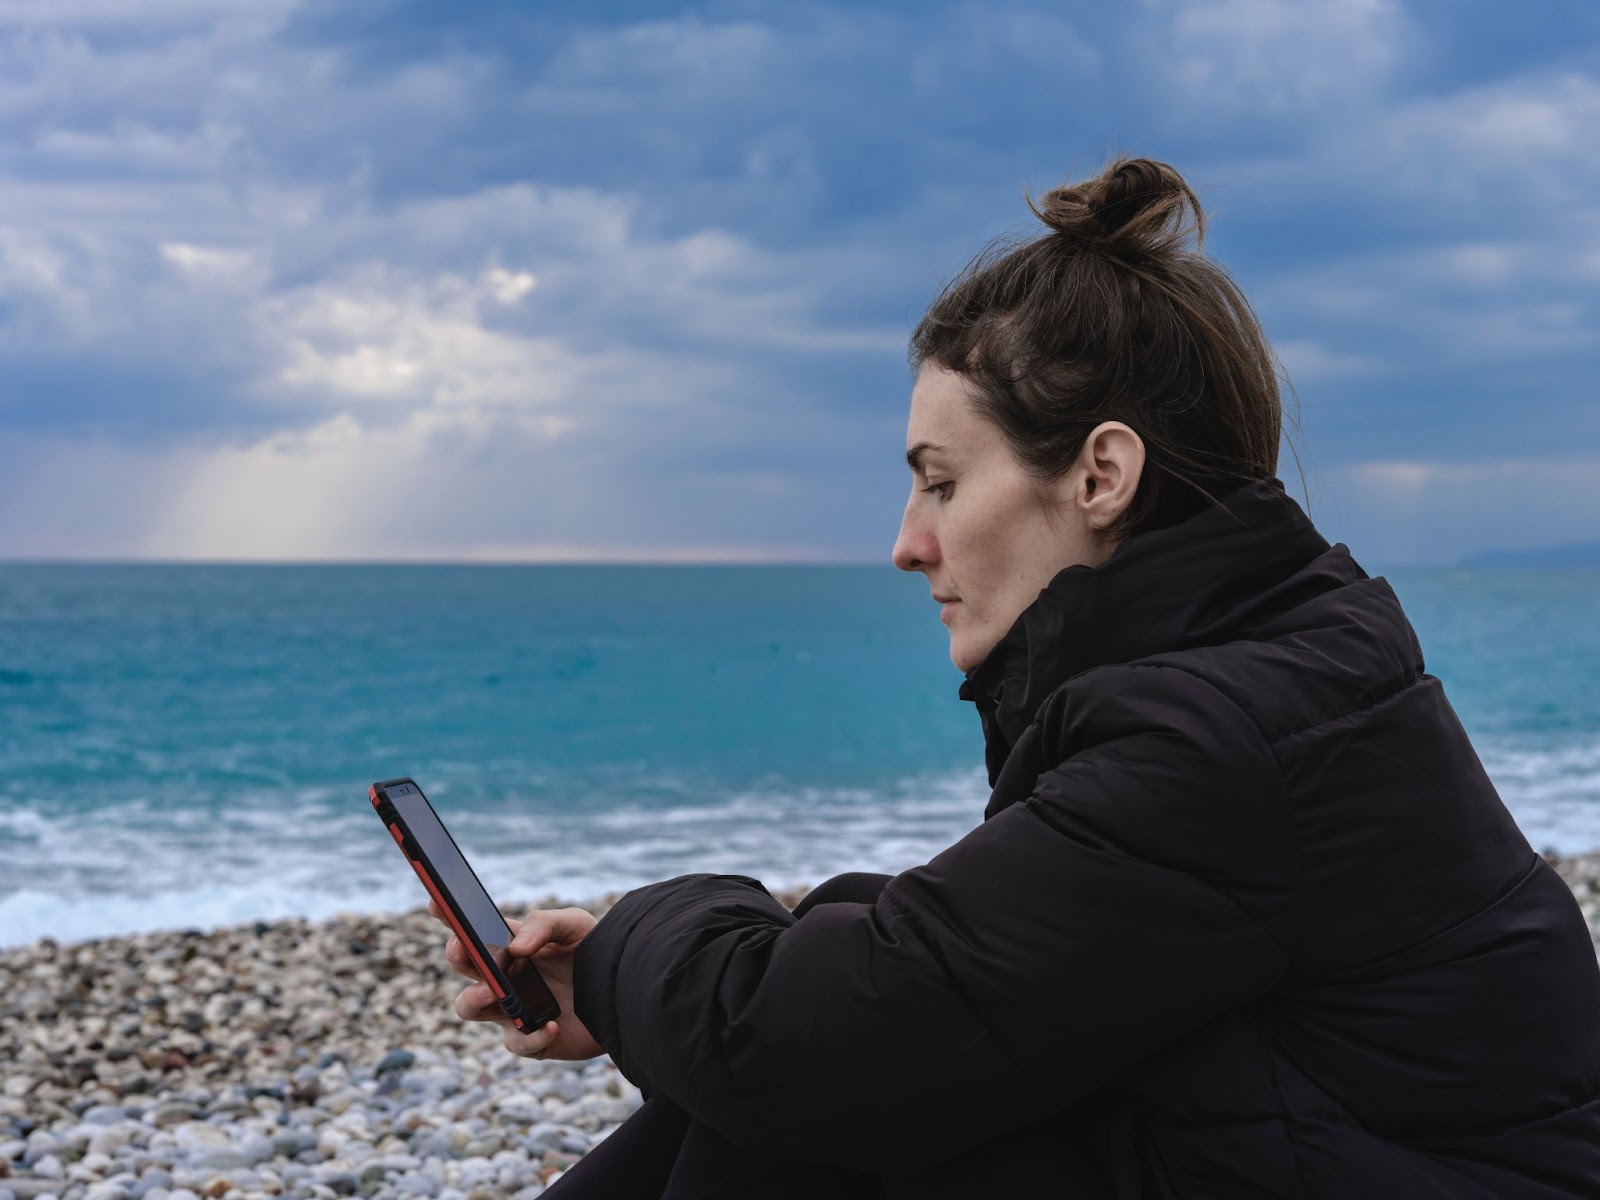 A woman on her phone in thought, sitting next to the ocean